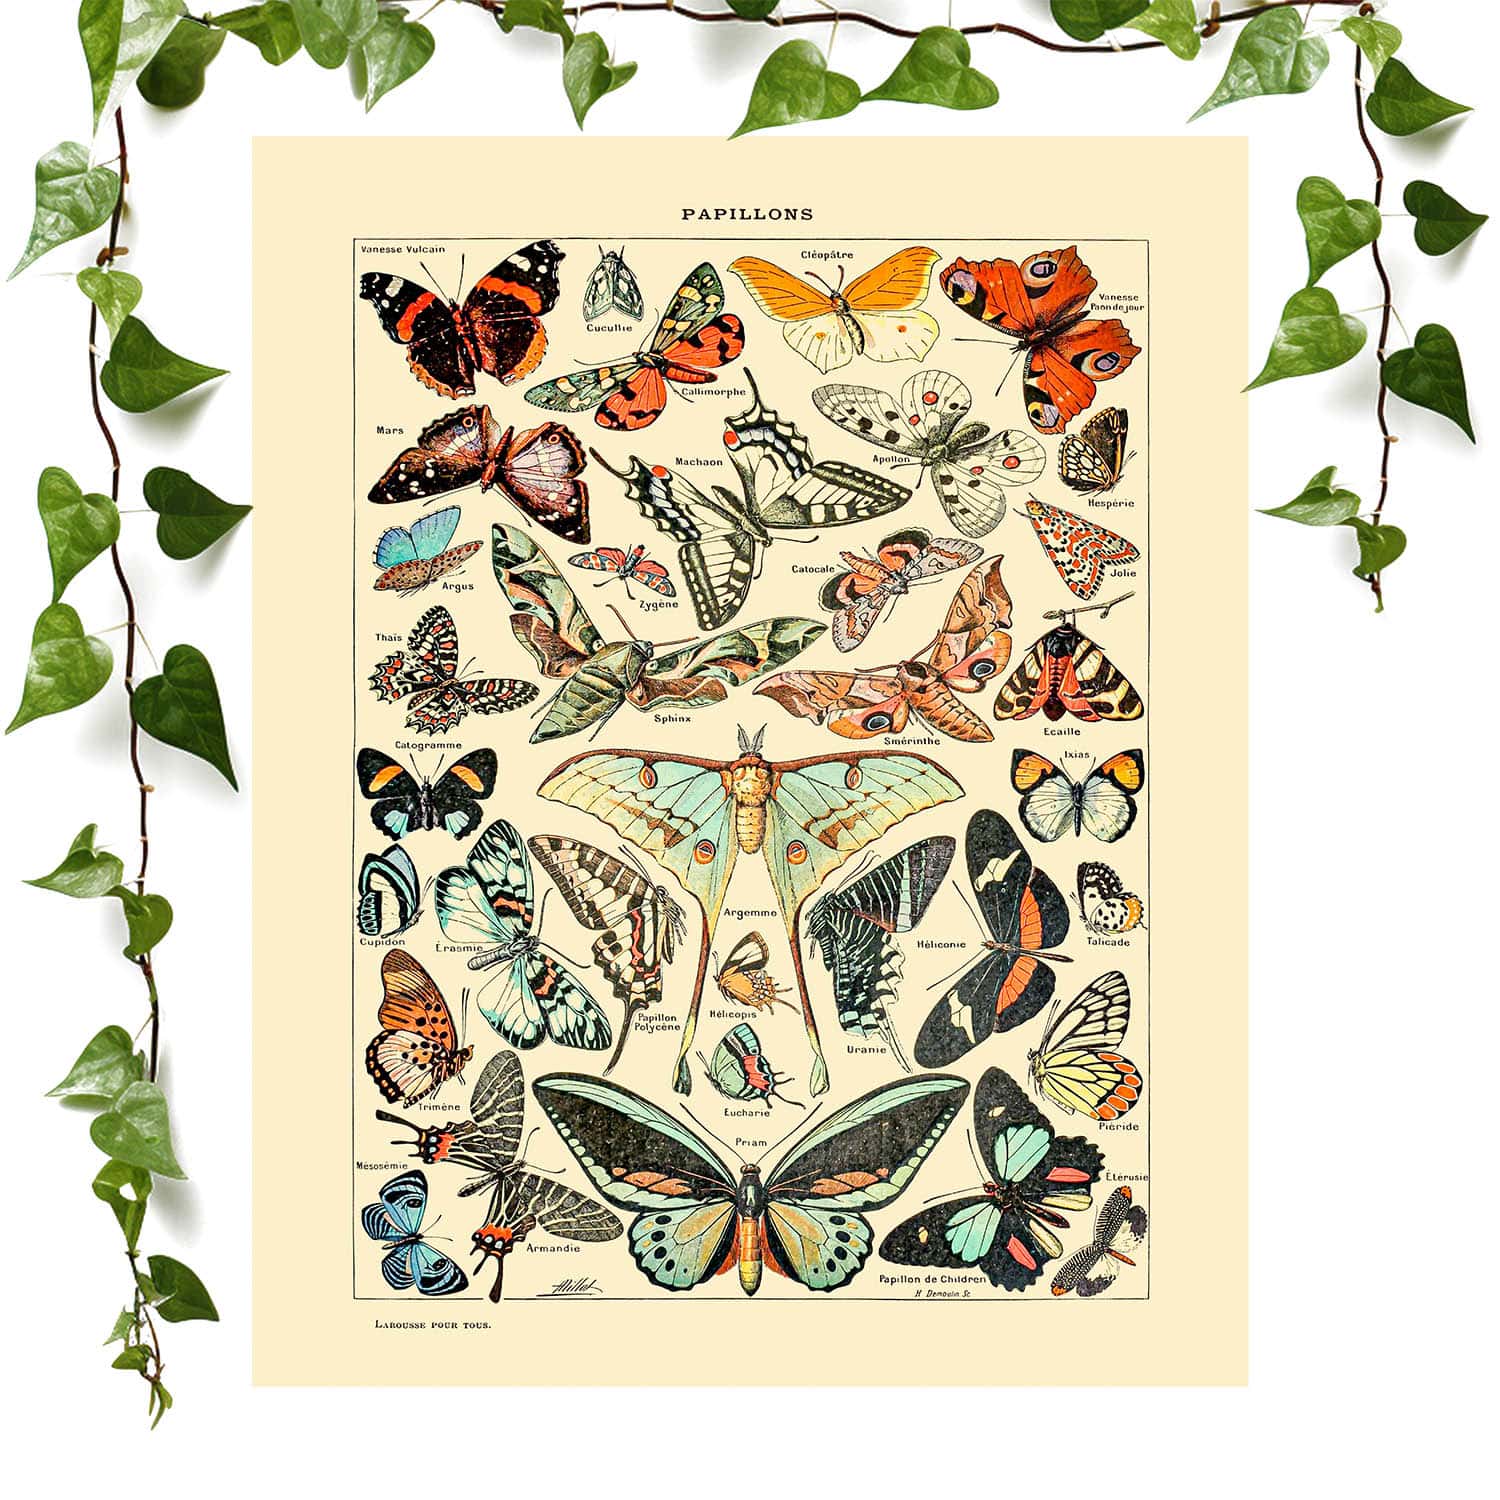 Butterfly art print by Adolphe Millot